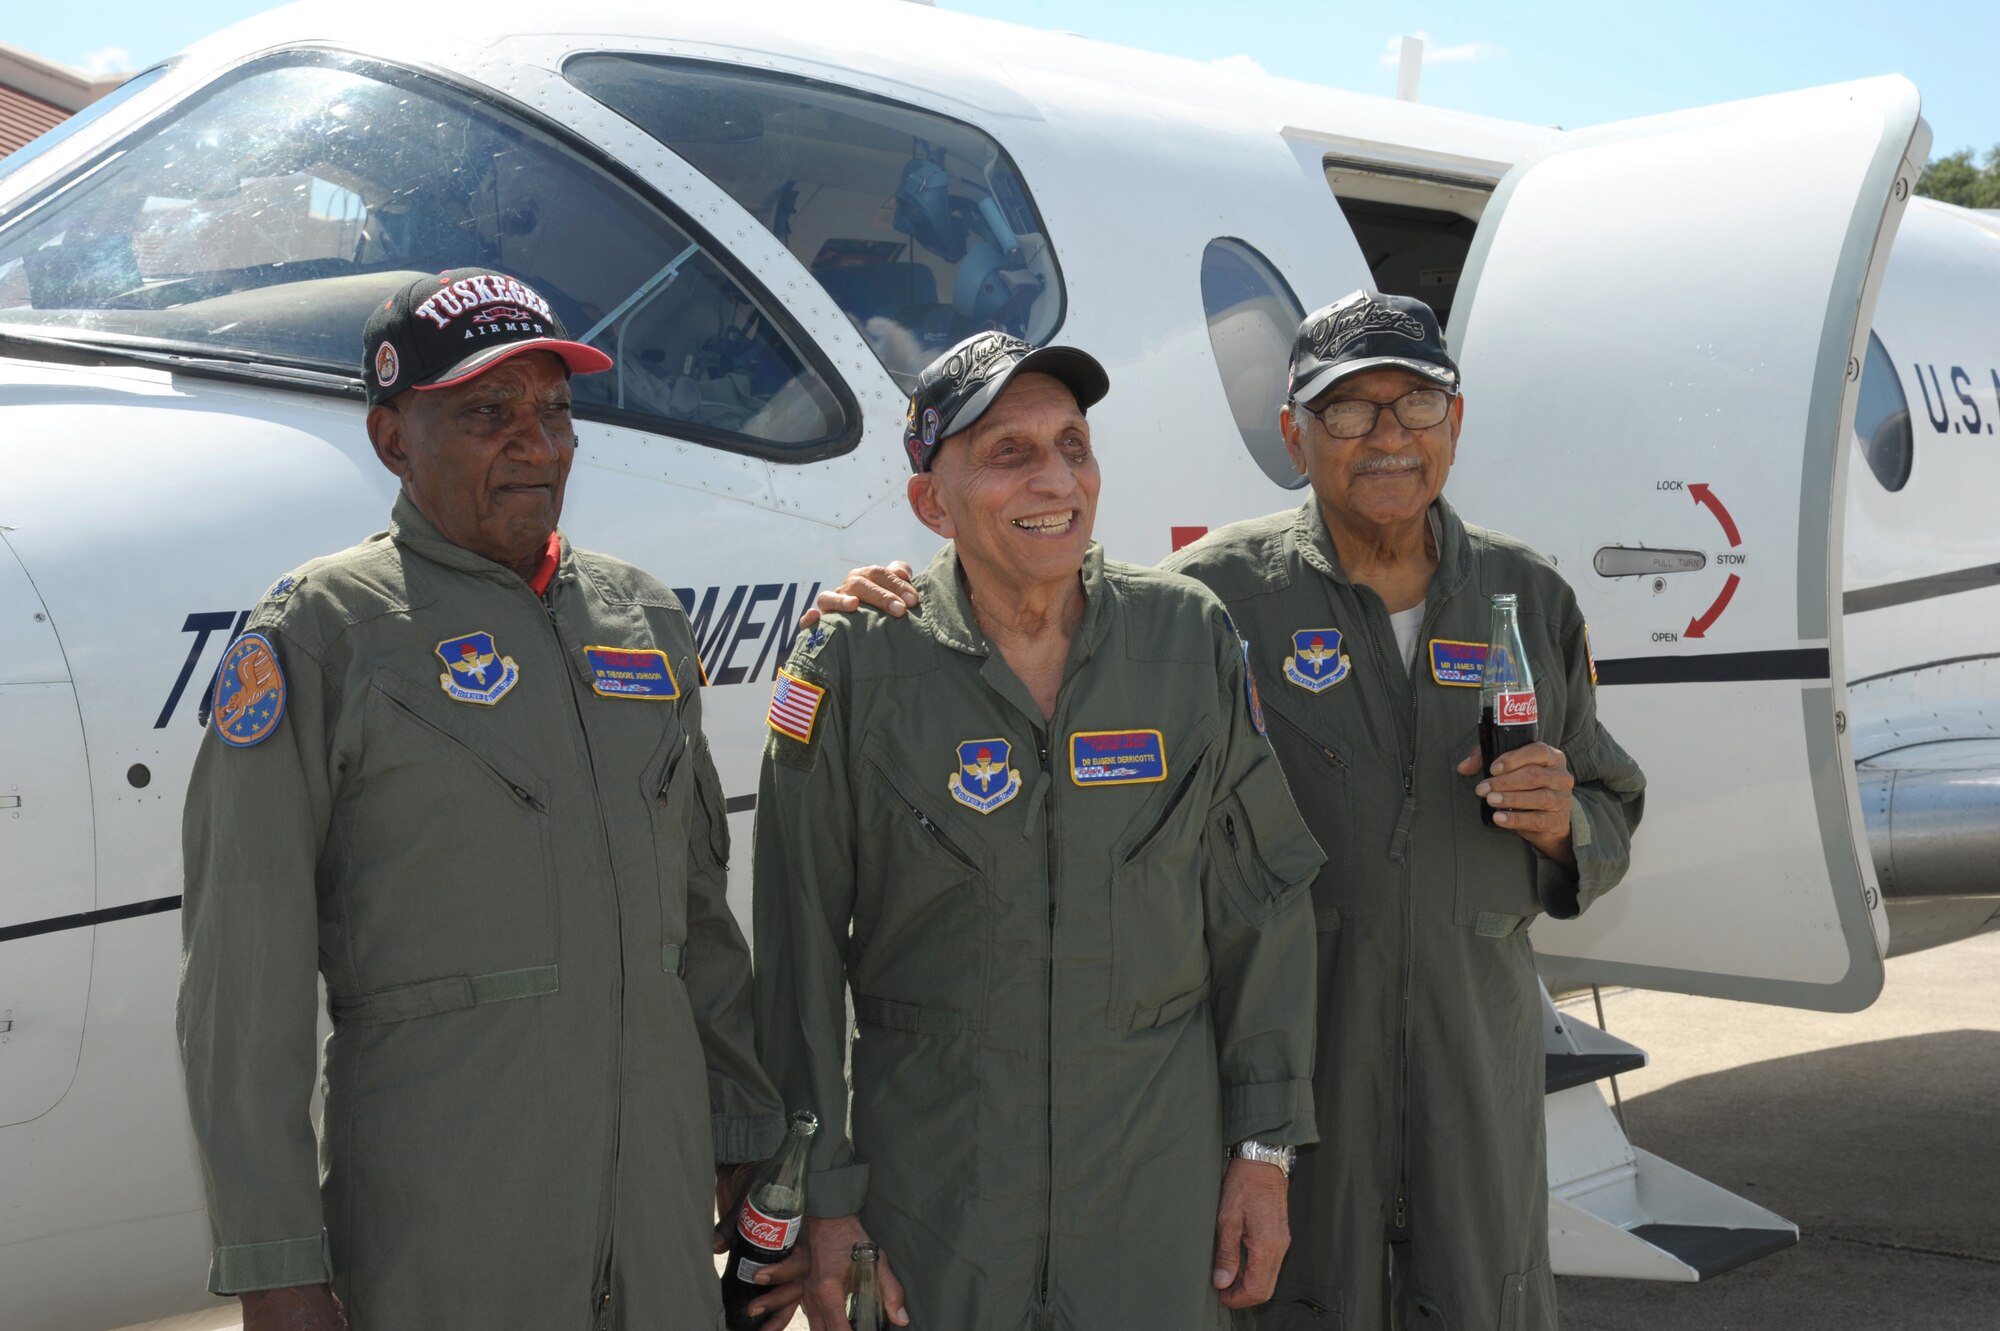 Theodore Johnson, left, Dr. Eugene Derricotte and James Bynum, original Tuskegee Airmen, pose for a photo in front a T-1 Jayhawk aircraft, during the Tuskegee Airmen Tribute 2015, June 11, at Joint Base San Antonio-Randolph, Texas. The Tuskegee Airmen were the first African-American military aviators in the United States Armed Forces beginning in World War II.  (U.S. Air Force photo by Joel Martinez)